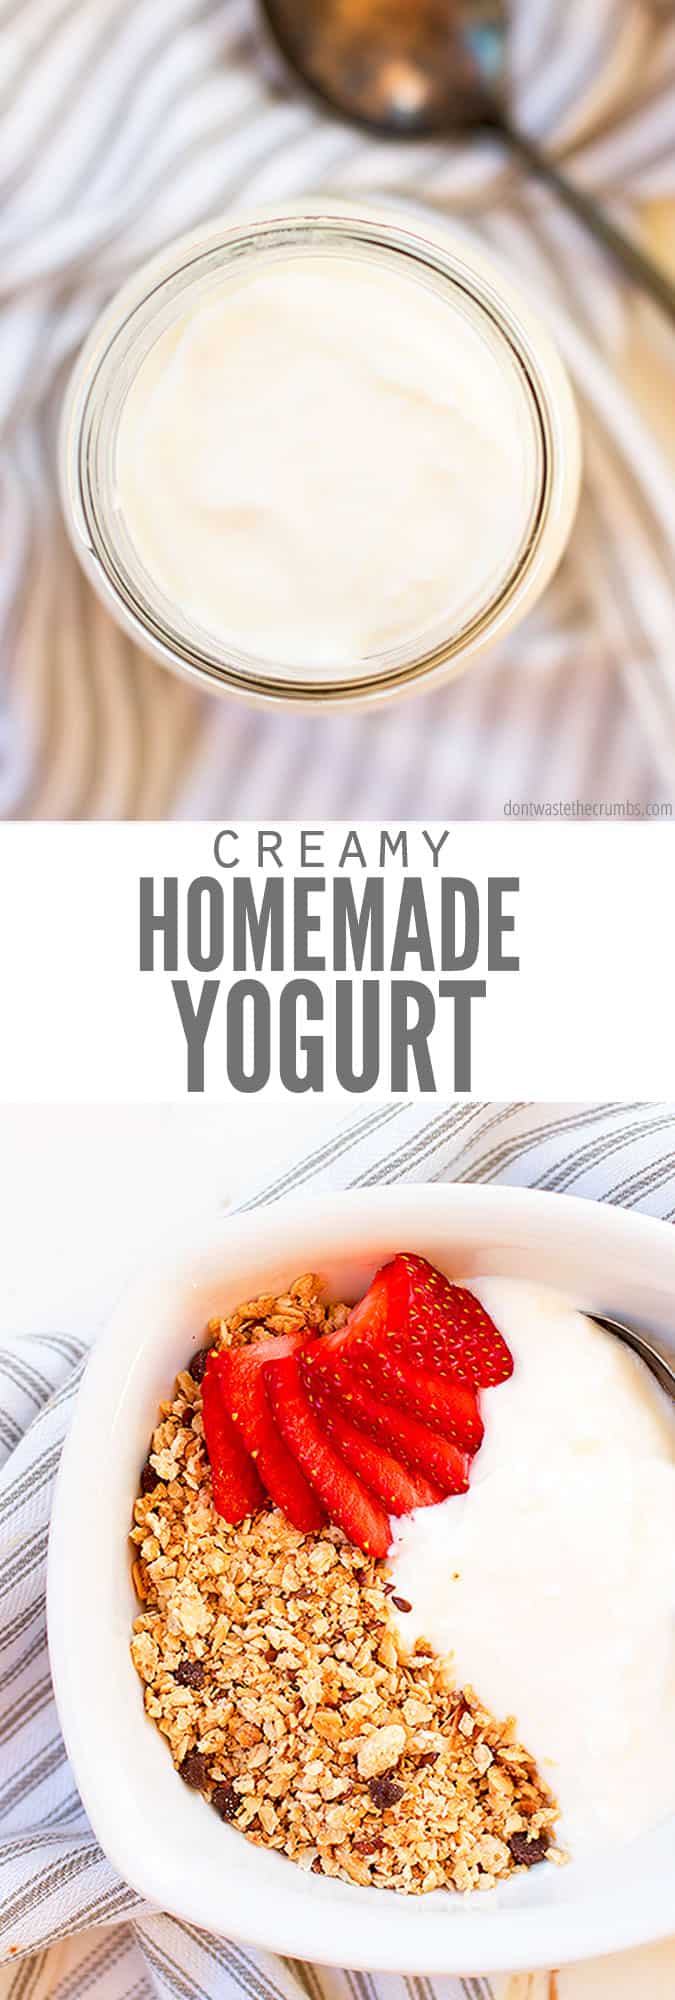 Learn How to Make Yogurt with this tutorial using the super easy heating pad method, or even an Instant Pot. Adjust the tartness and flavor to your liking! Pair with our decadent Chocolate Peanut Butter Granola, or our Homemade Cranberry Orange Granola and serve with fresh seasonal fruit. #instantpot #homemade #healthy #snack #breakfast #dontwastethecrumbs